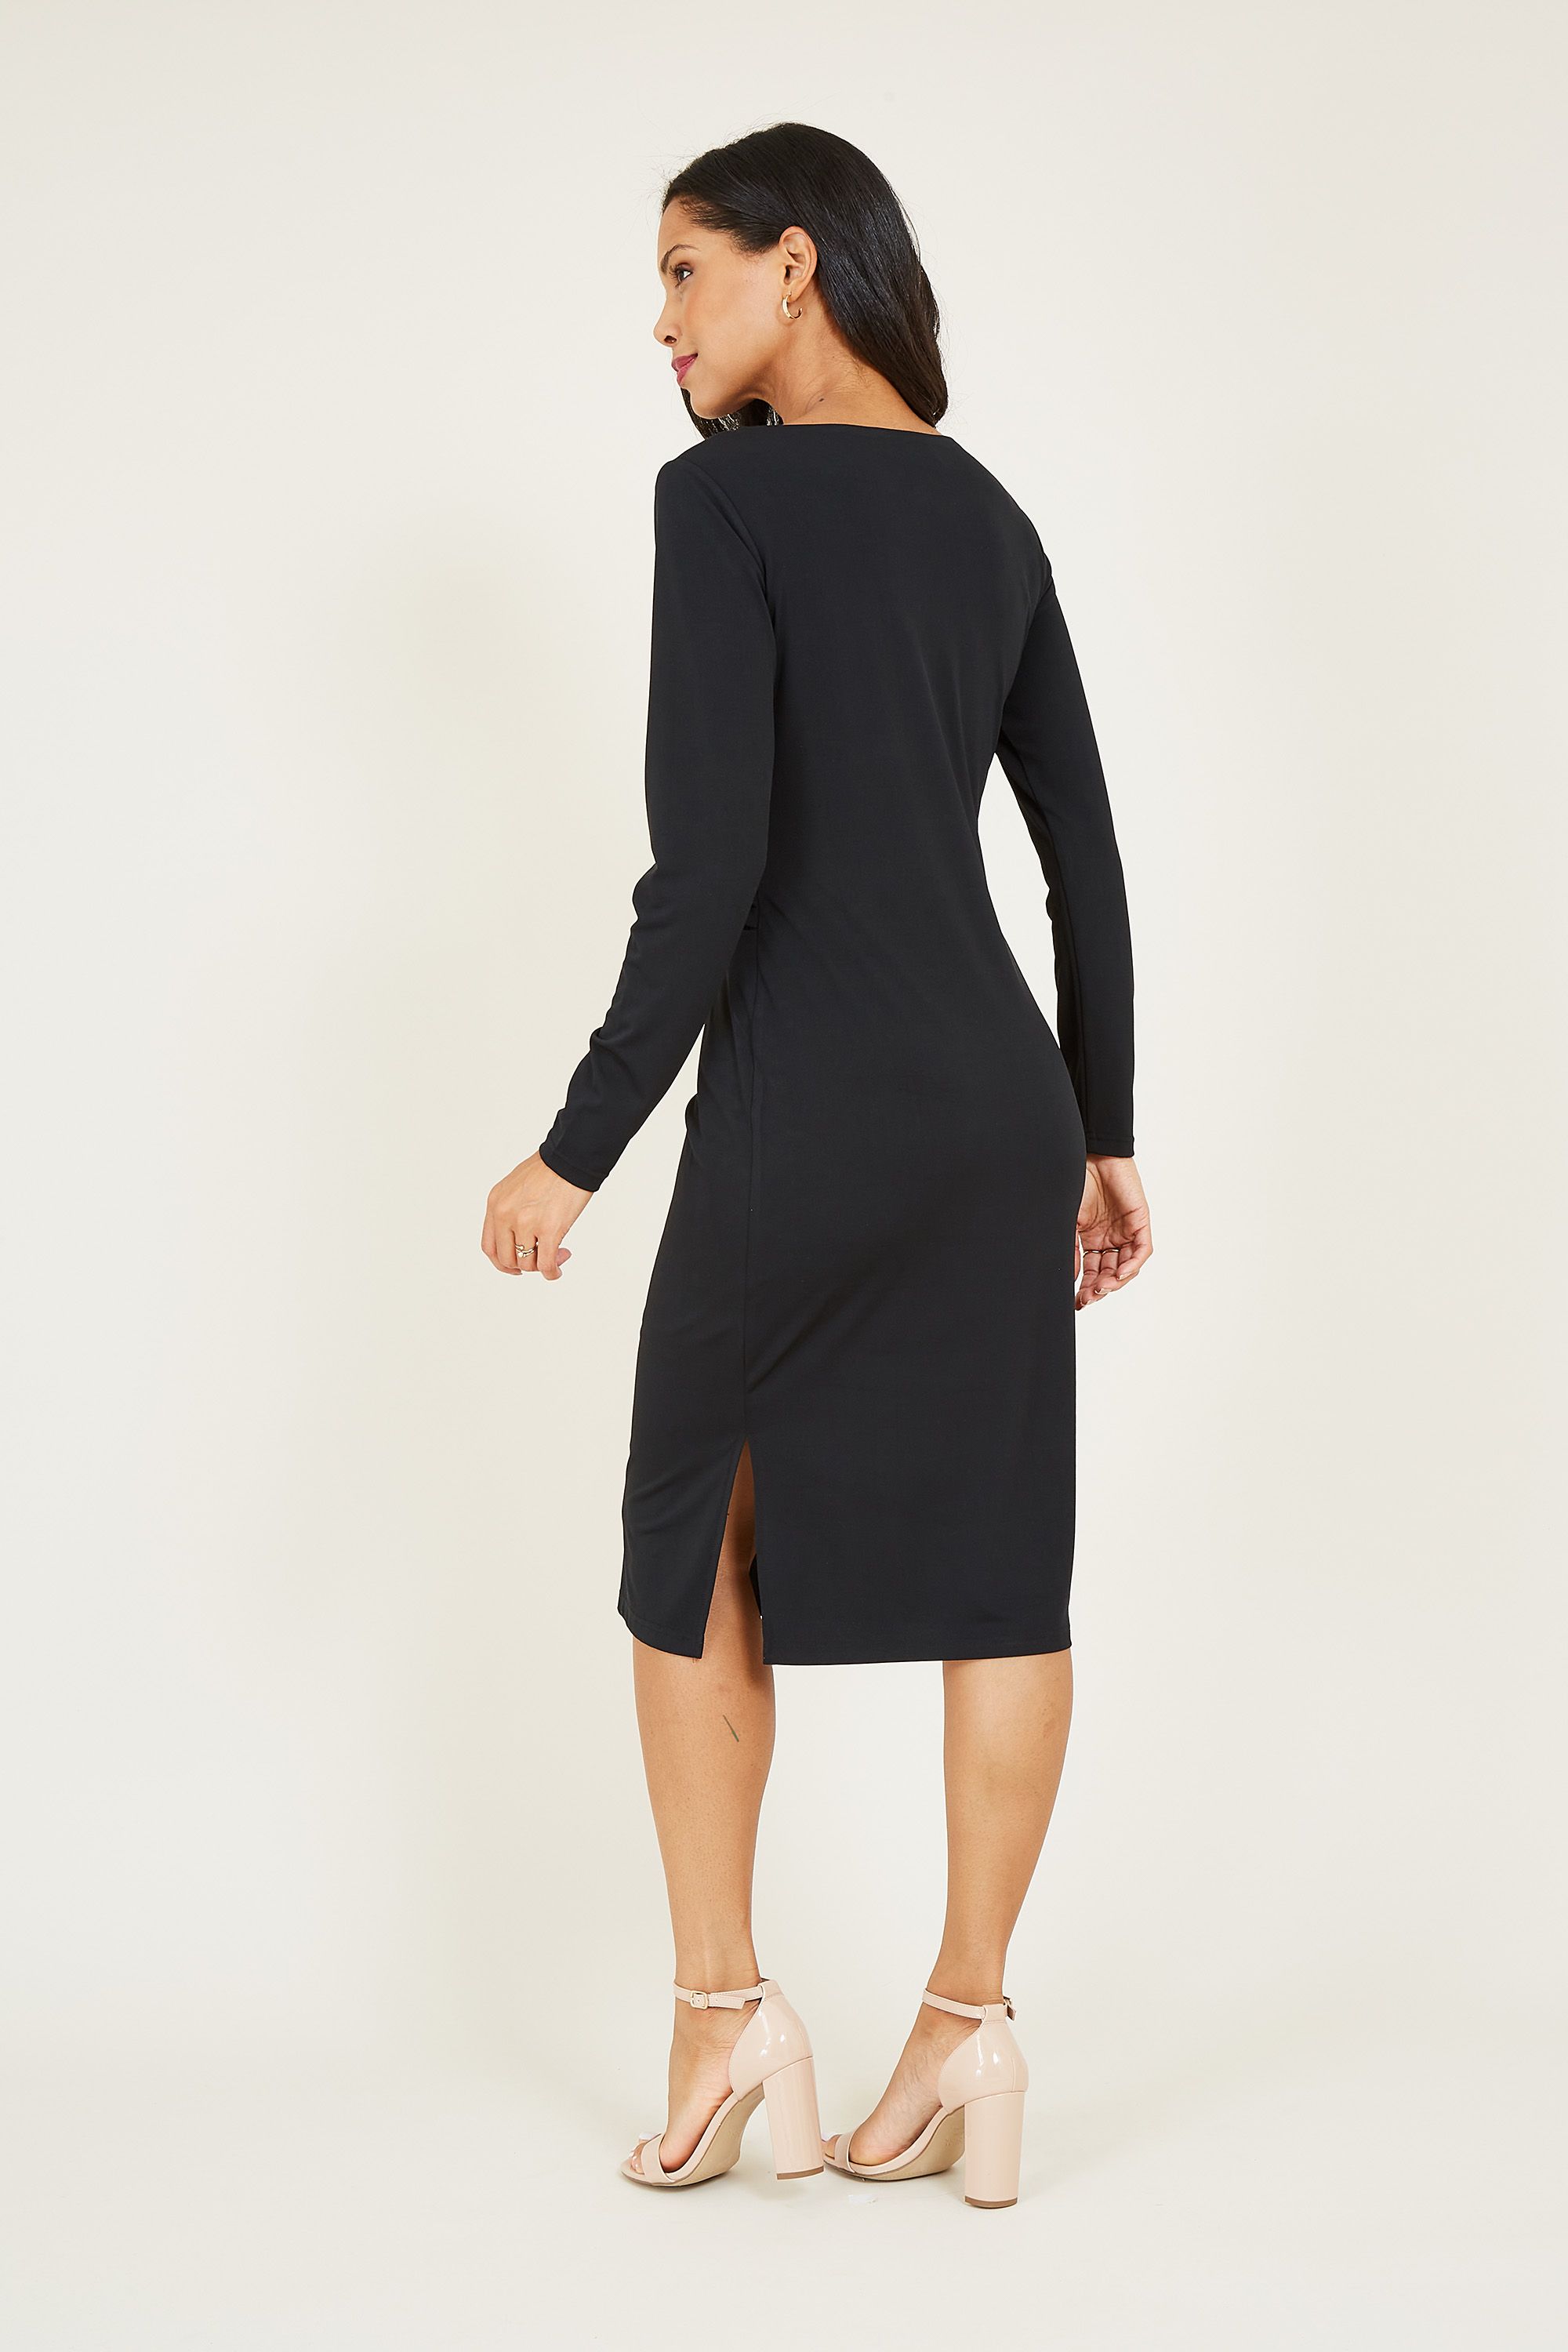 Achieve total elegance when you wear our Mela Buckle Bodycon Dress. In a form-fitting shape that sits below the knee, it's crafted from soft-touch fabric to keep you comfortable all night long. The ruched waistline is enhanced by a faux-pearl buckle, whilst the long sleeves and a high neckline balance your profile. When styling, consider heels and a clutch bag.